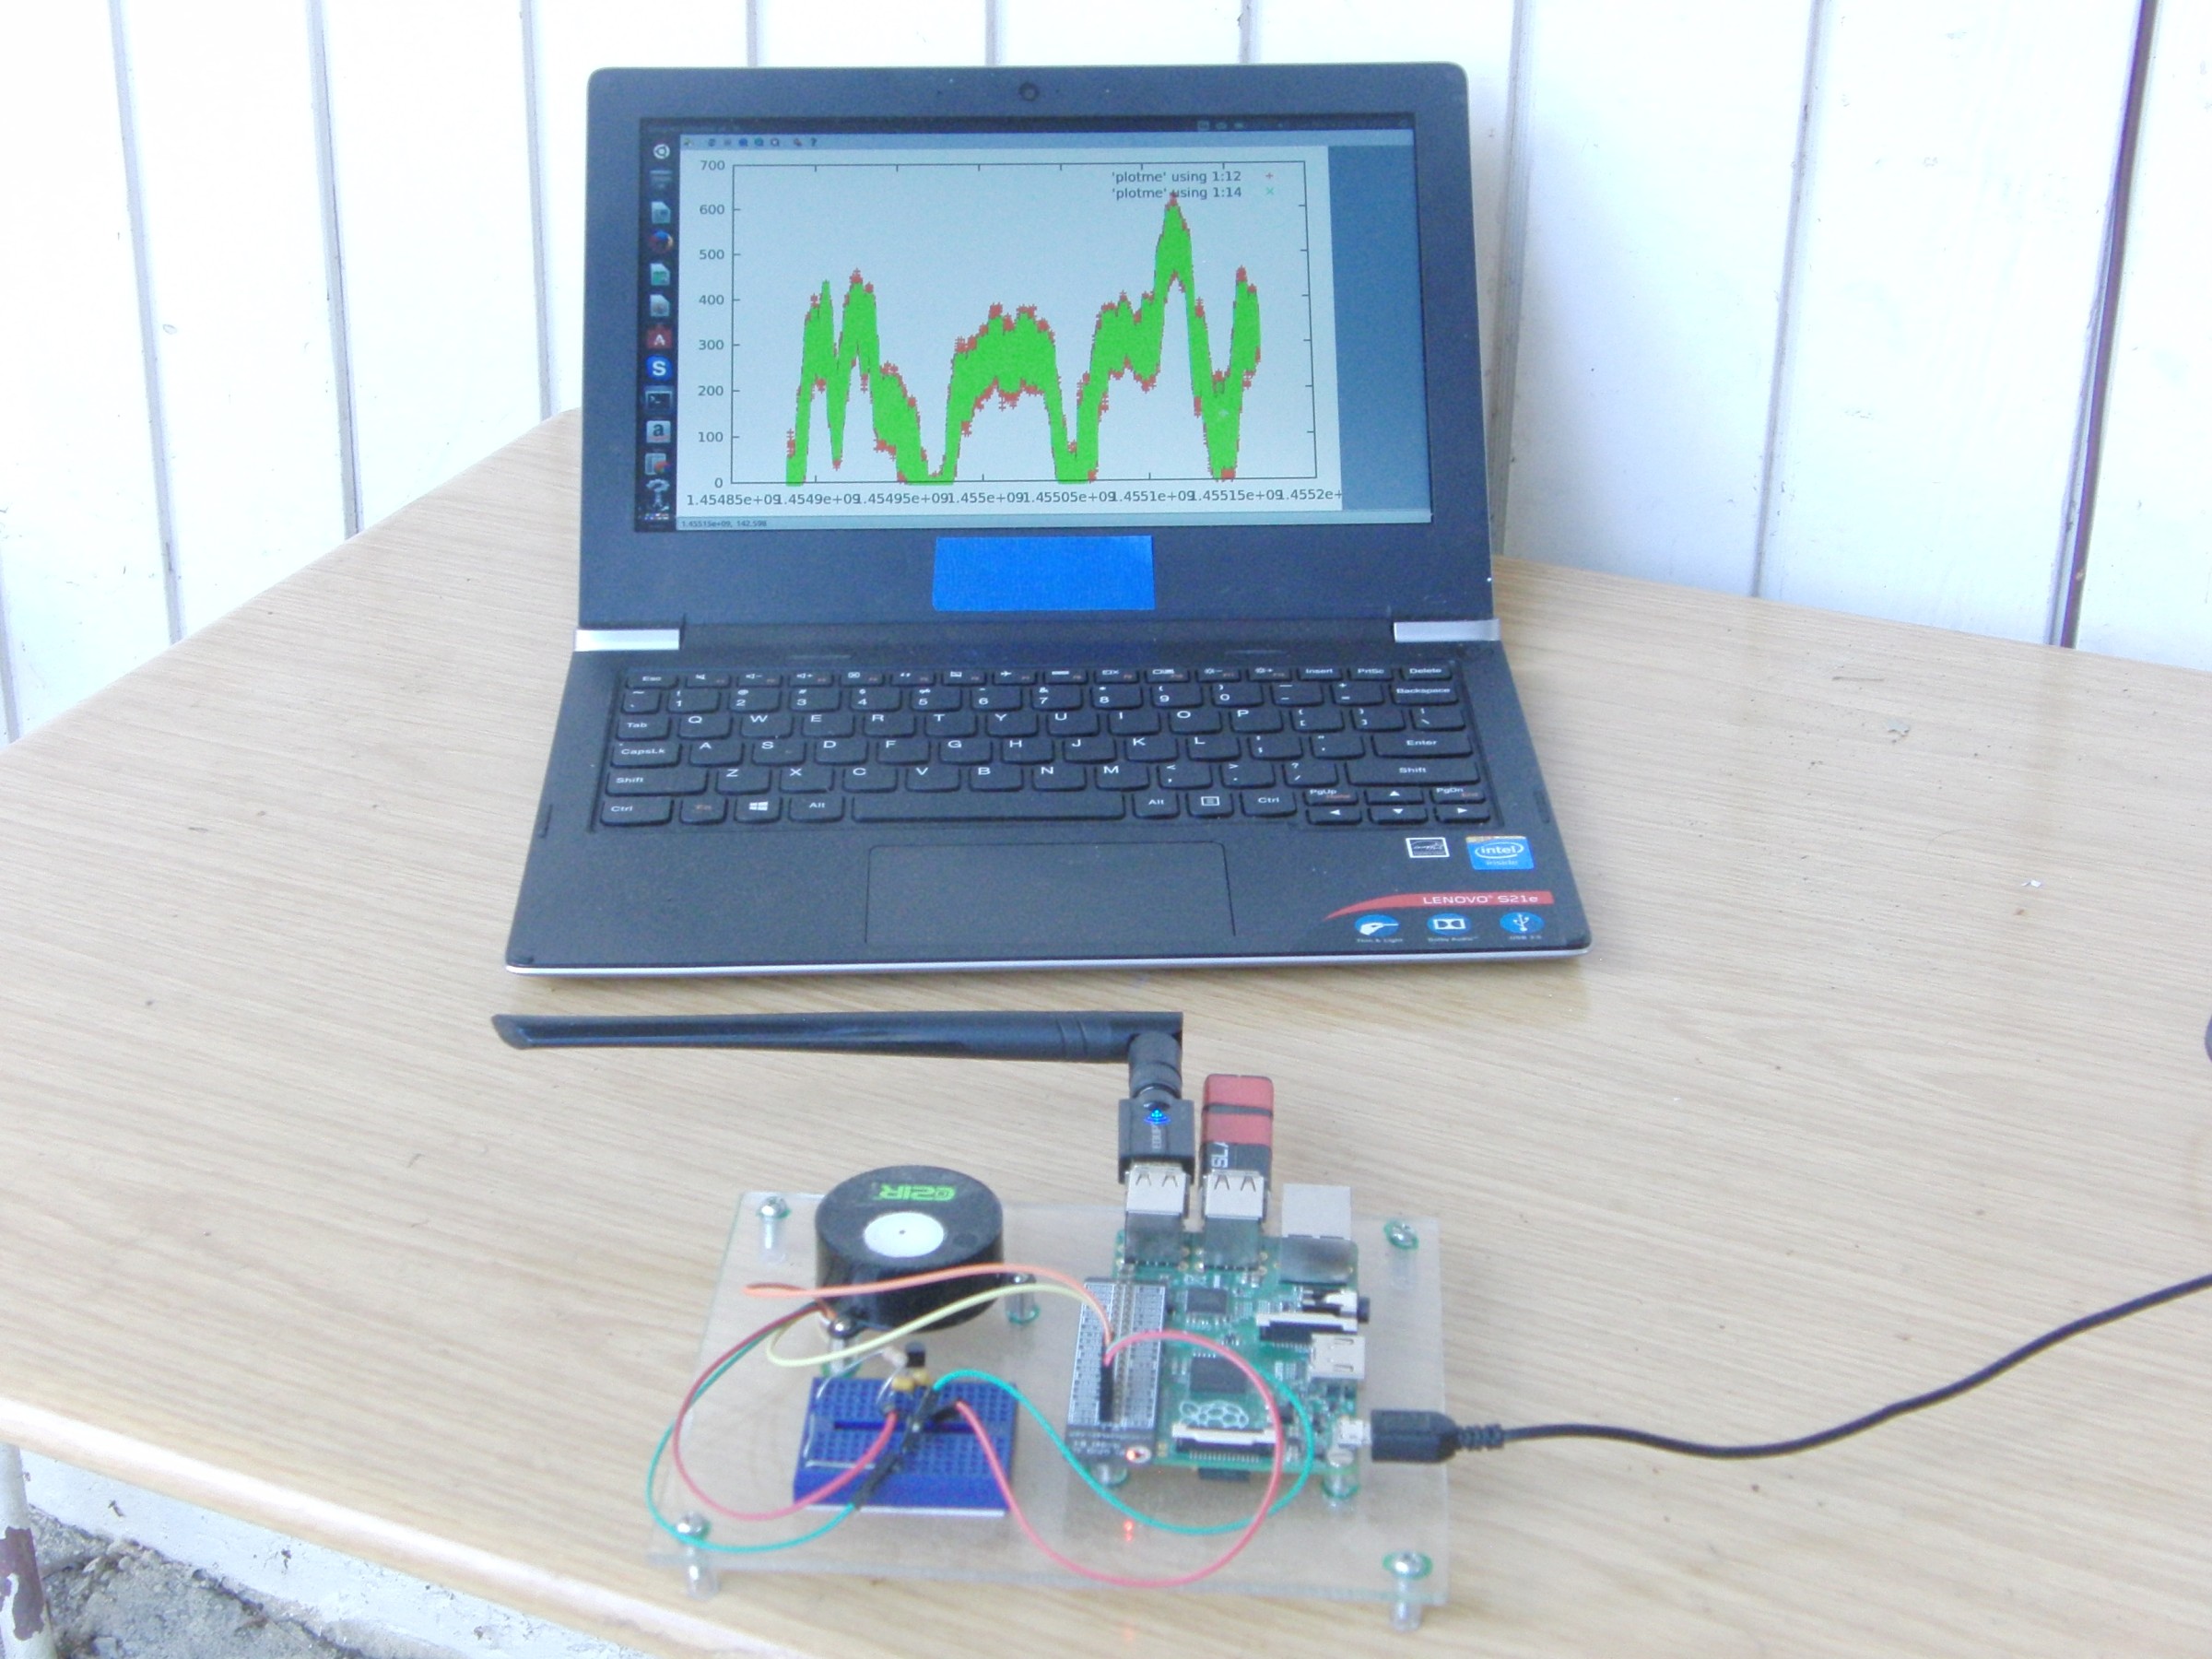 CO2 measurement devices, and a tabletop model showing how to not emit CO2